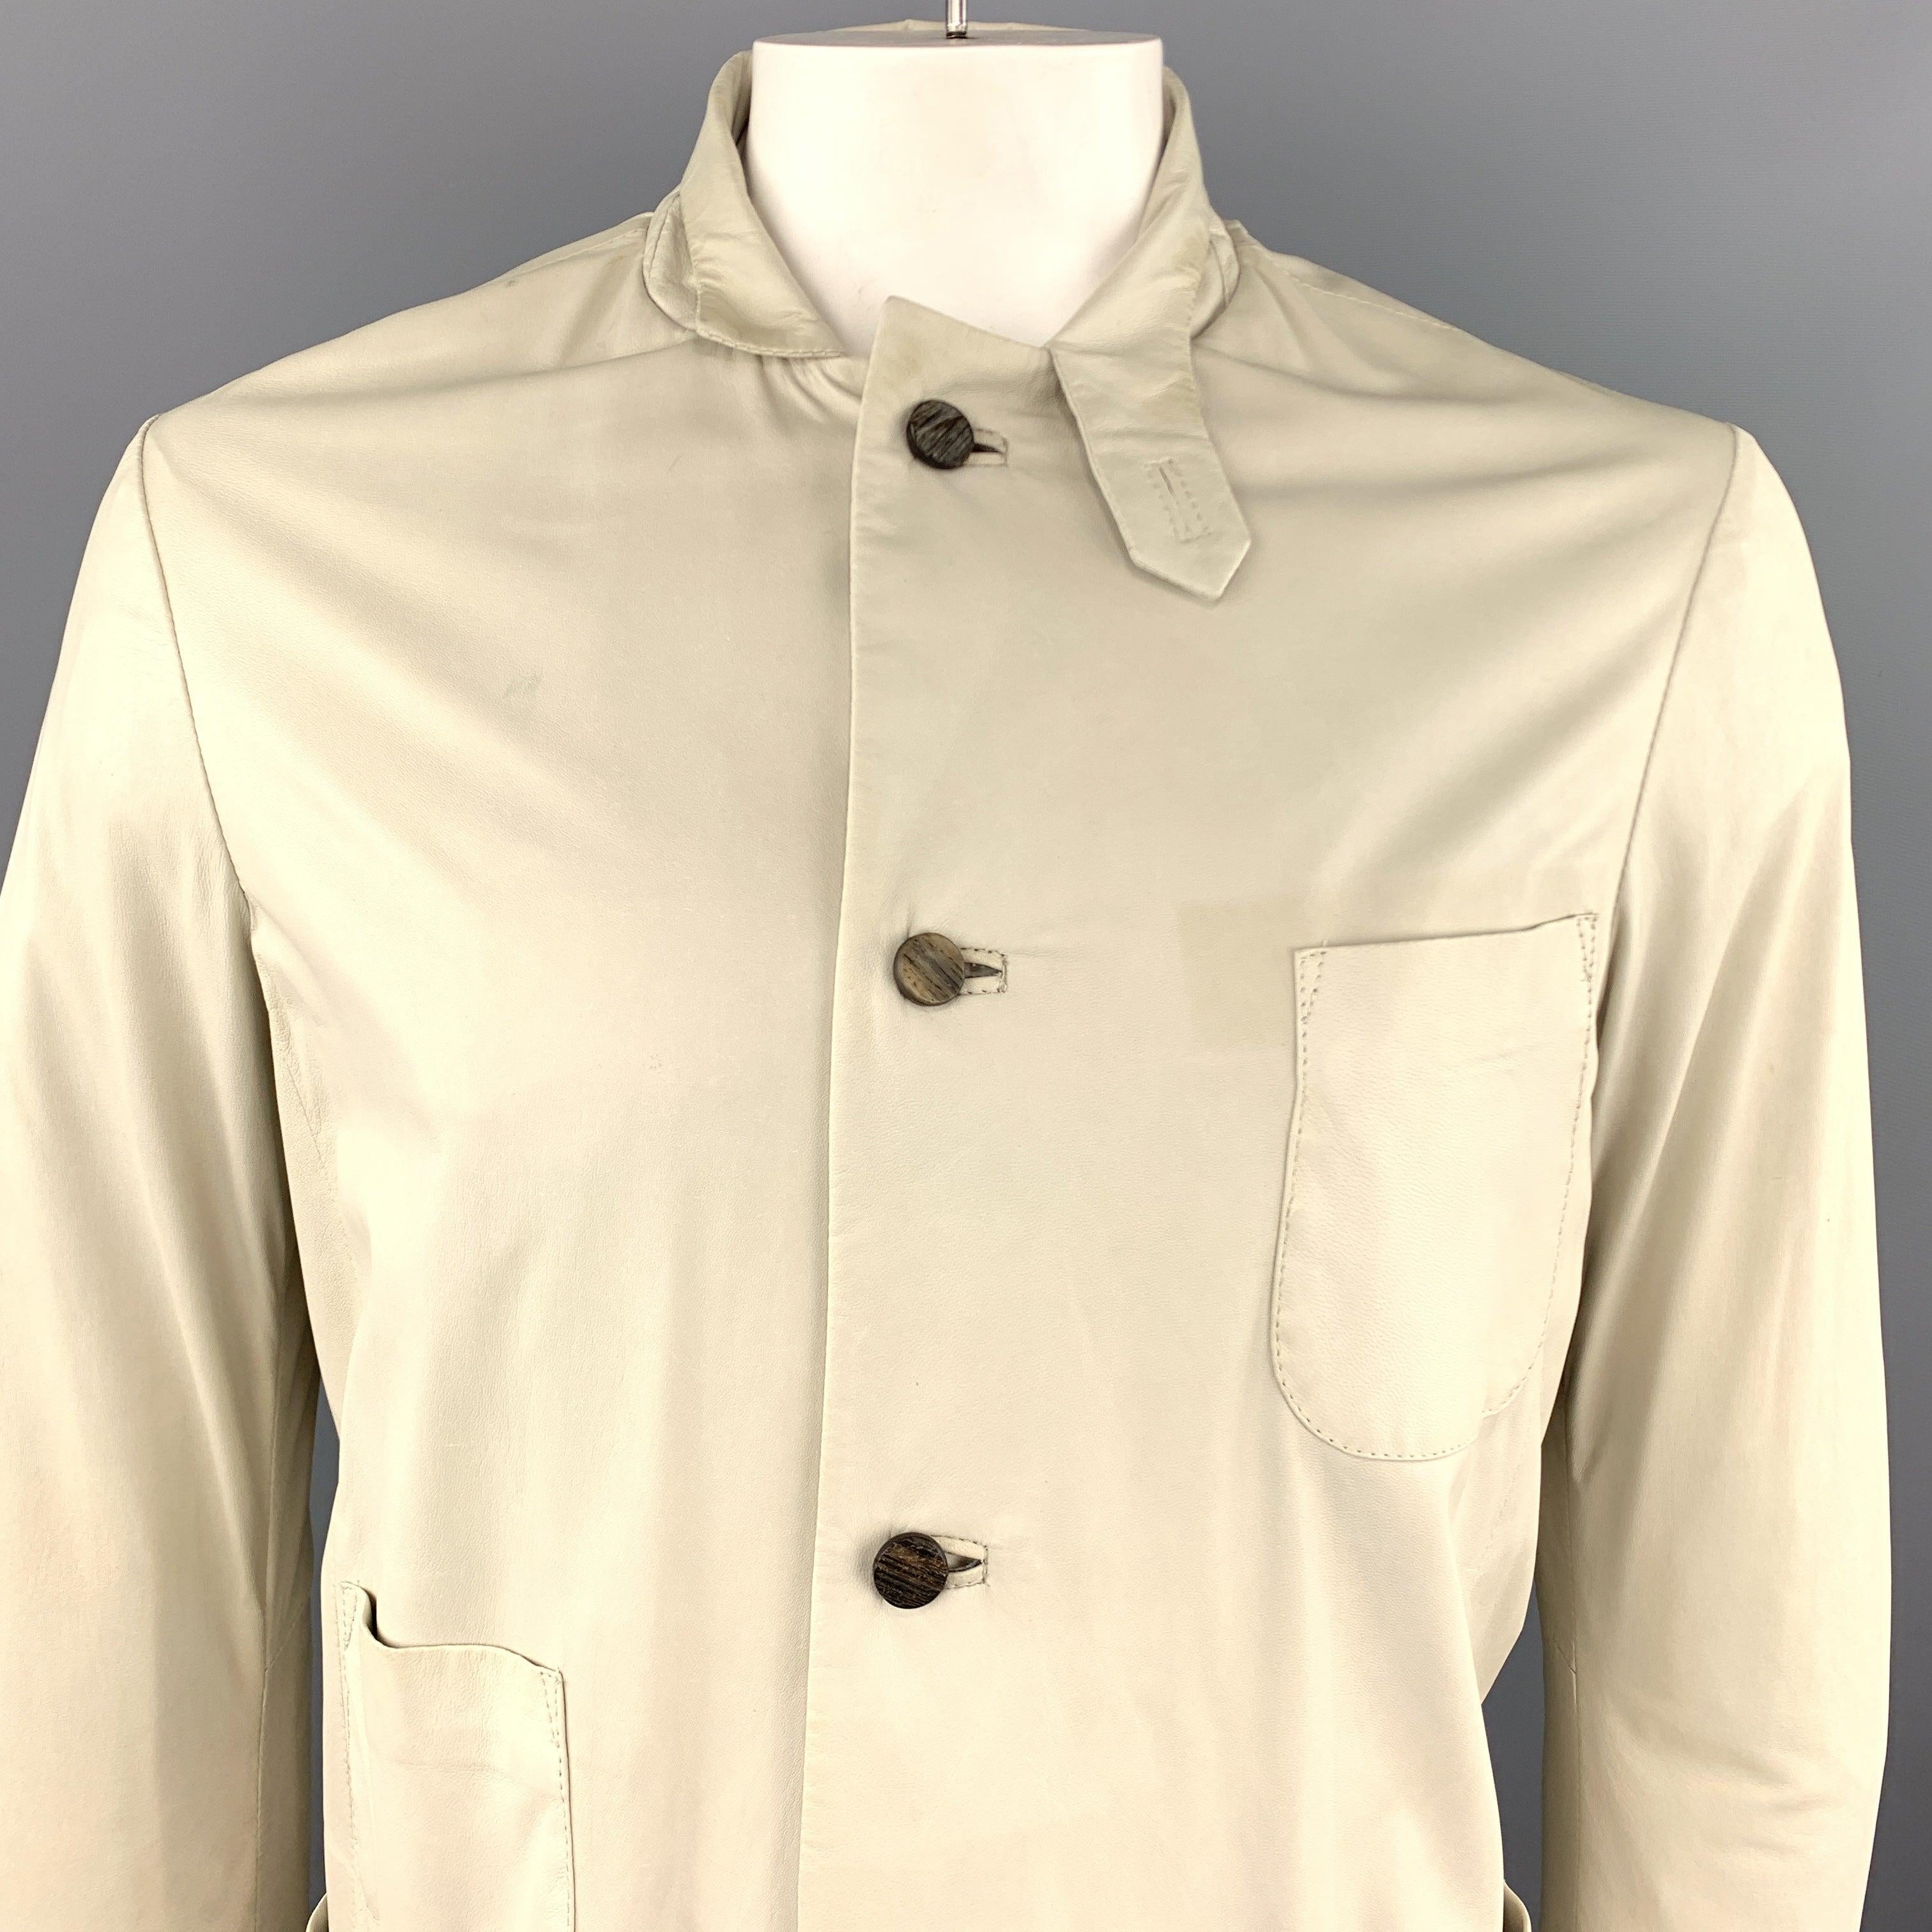 GIORGIO BRATO jacket comes in ultra soft, light weight ivory leather with a single breasted button up front, tab stand up collar, nylon liner, and patch pockets. Discolorations throughout leather. See detail shots. As-is. Made in Italy.Good